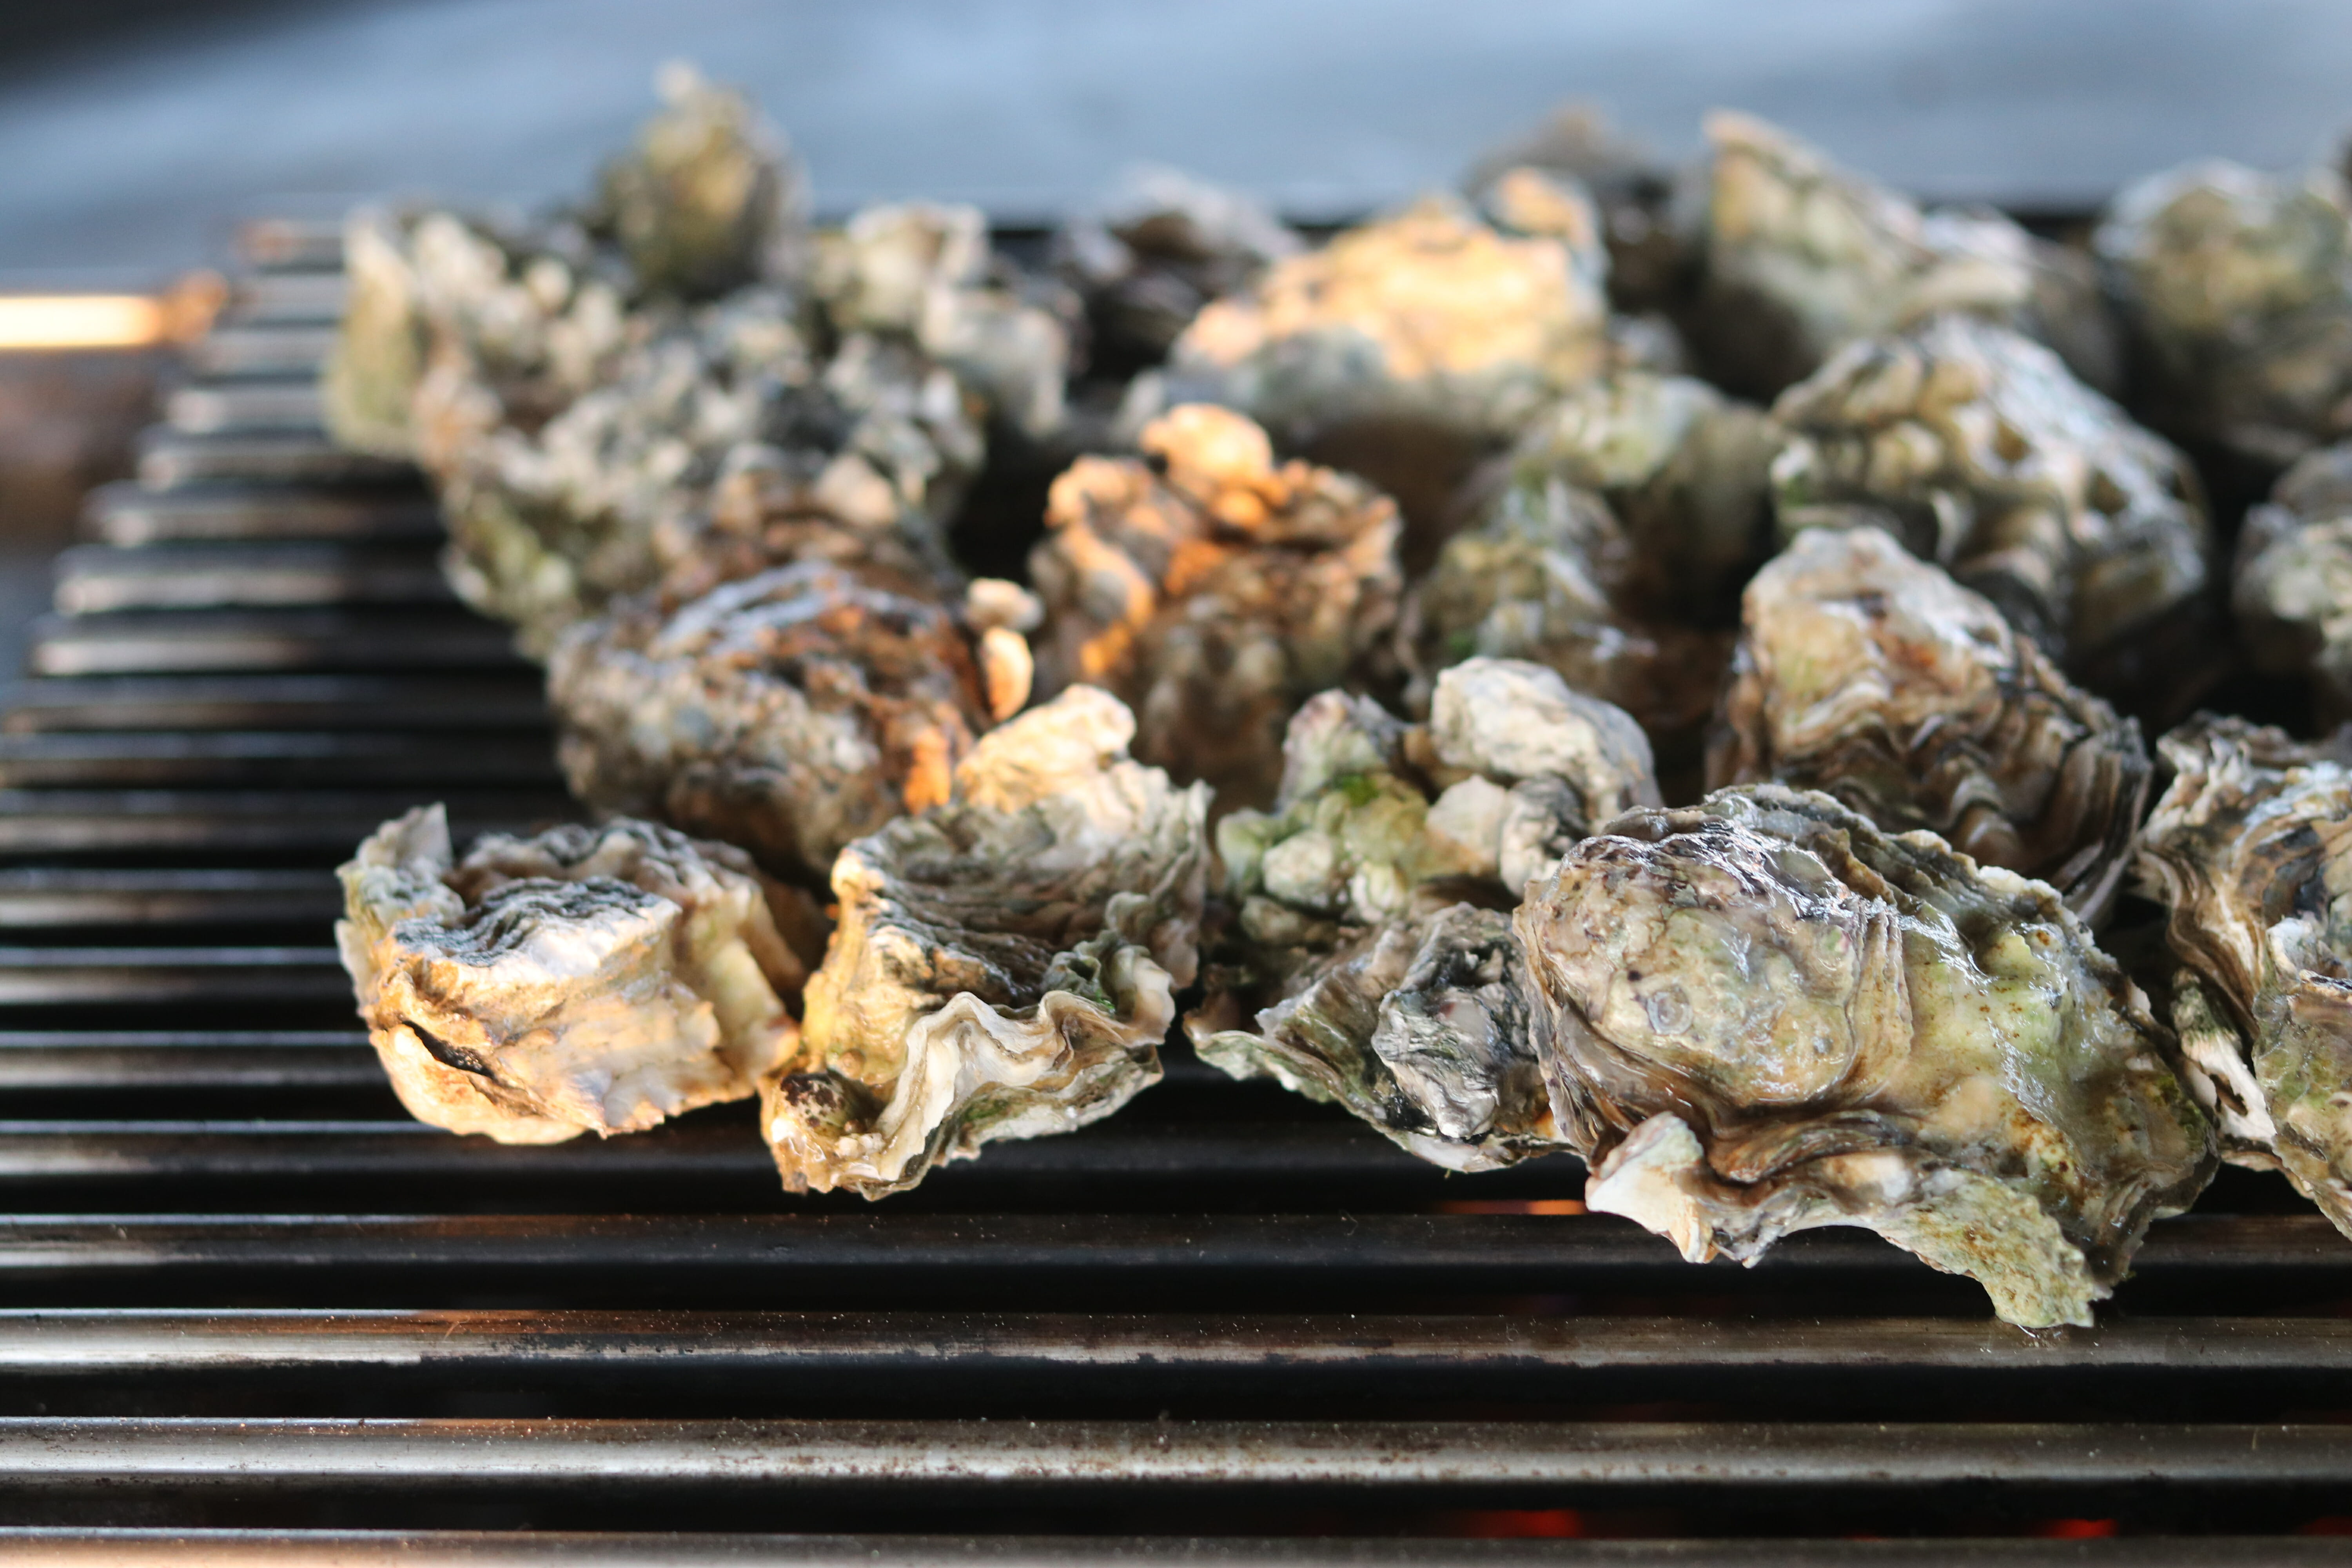 Grilling oysters